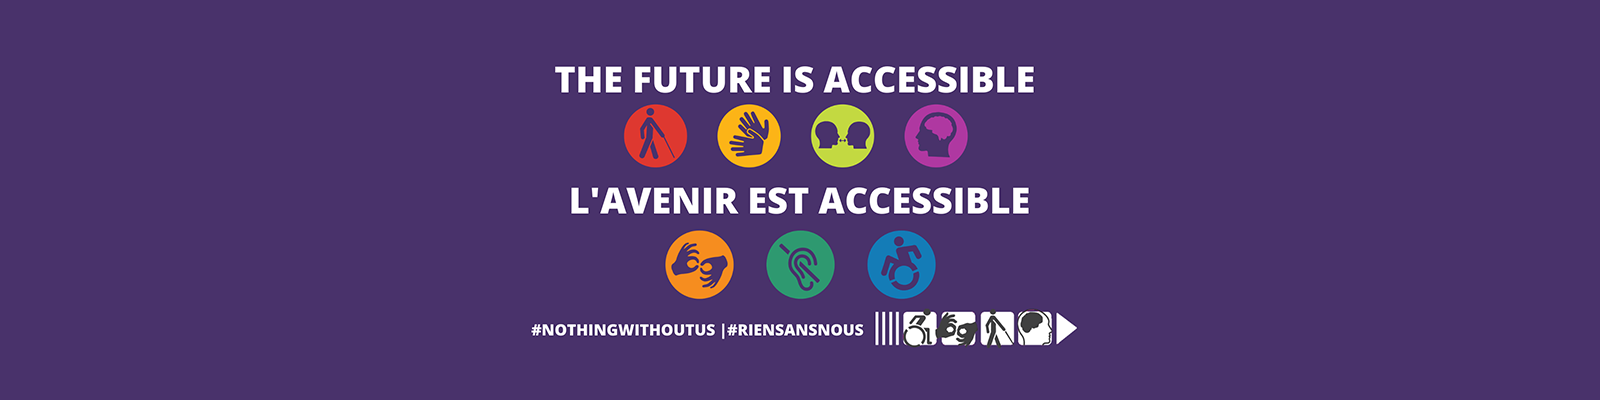 OPSA GCTools Header has a purple background with the words in the centre "The Future is Accessible" and "L'Avenir est Accessible". There are several universal icons for walking with a cane, sign language, communication, cognitive, hearing and mobility. #NothingWithoutUs #ReinSansNous